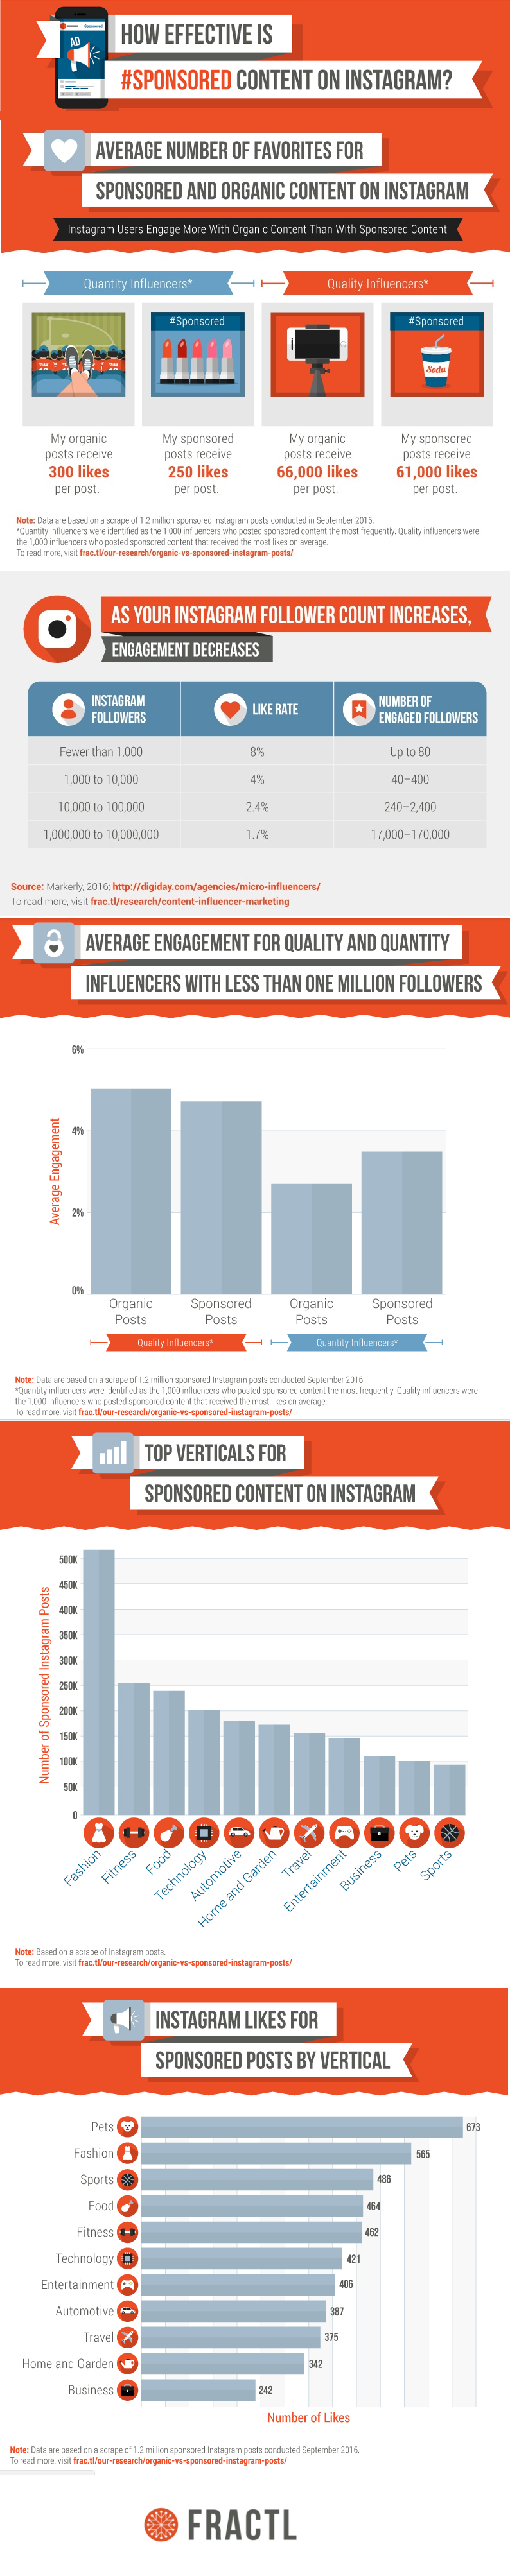 How Effective is Sponsored Content on Instagram? - #Infographic